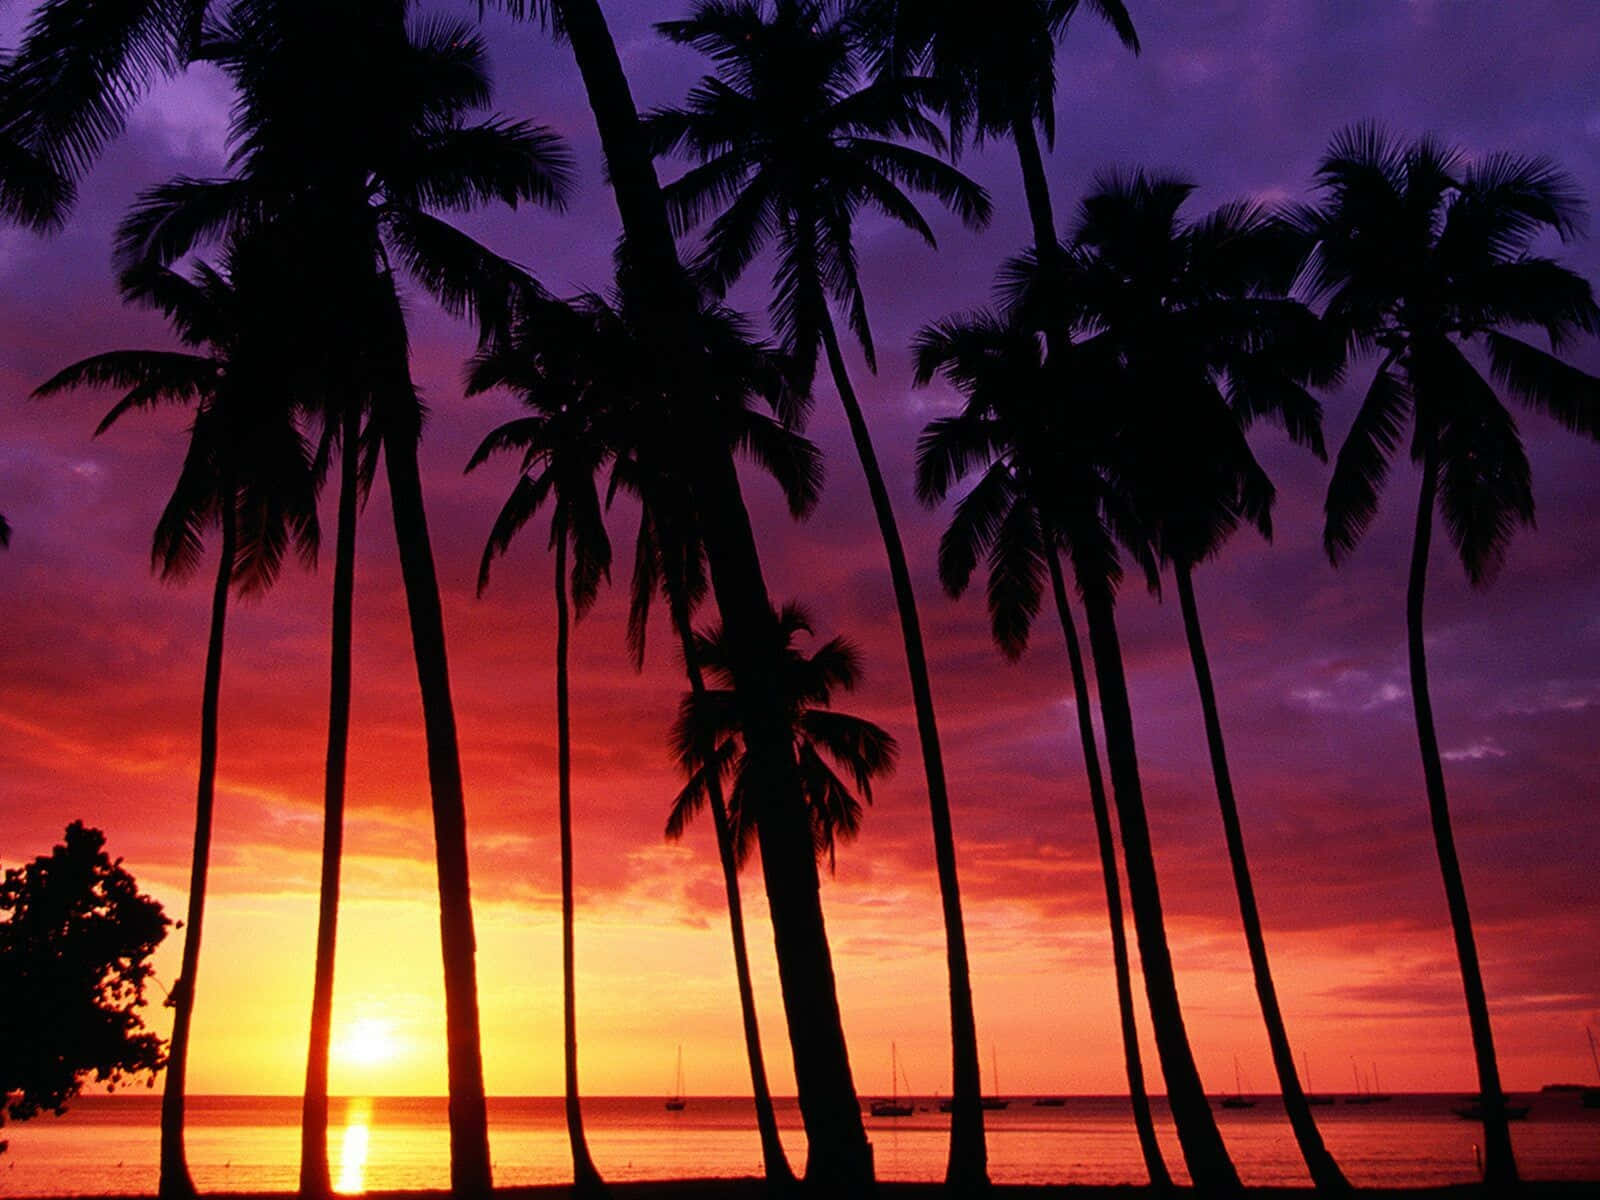 A Sunset With Palm Trees